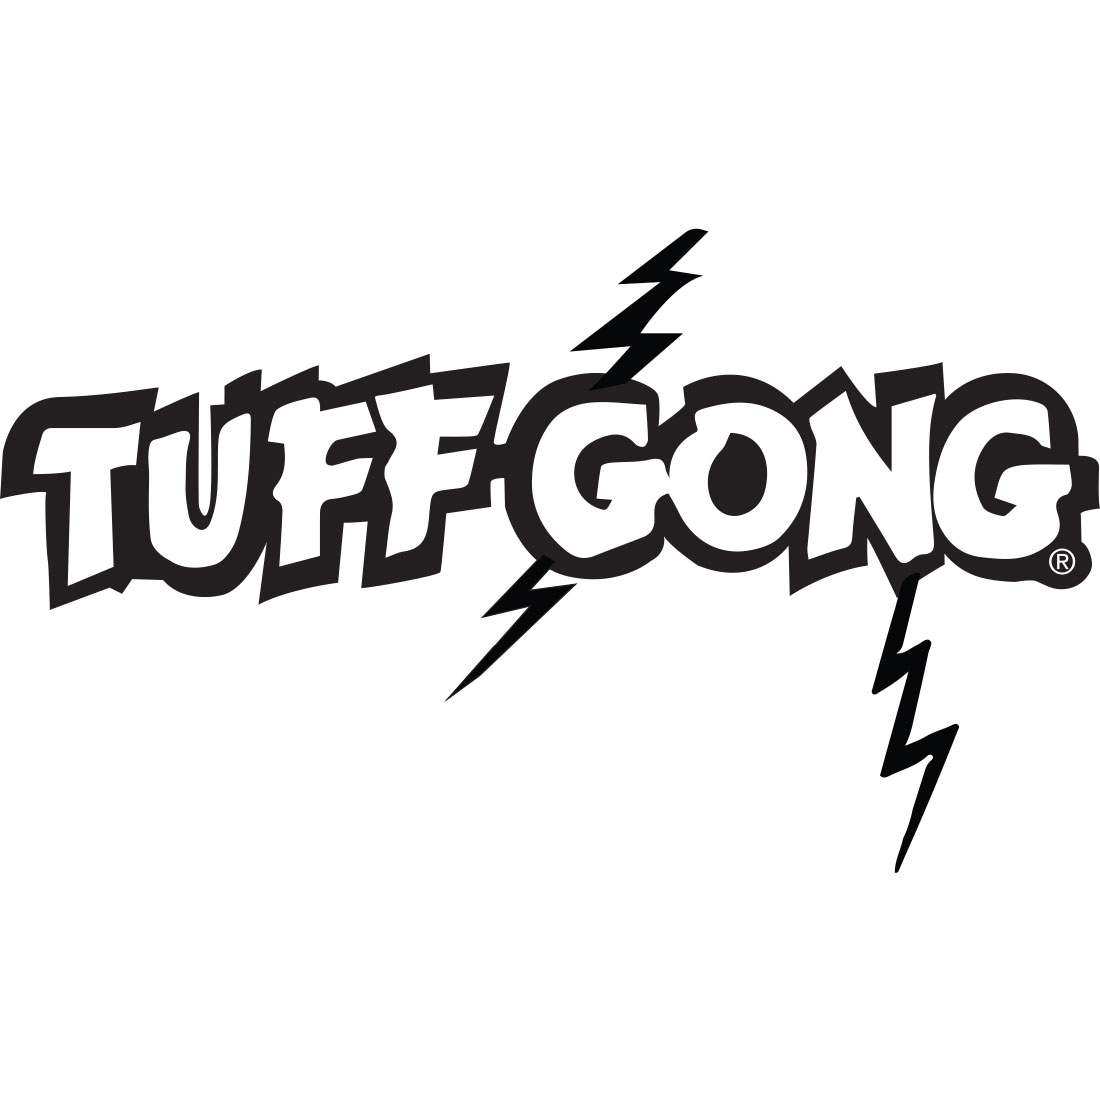 Tuff Gong Collective